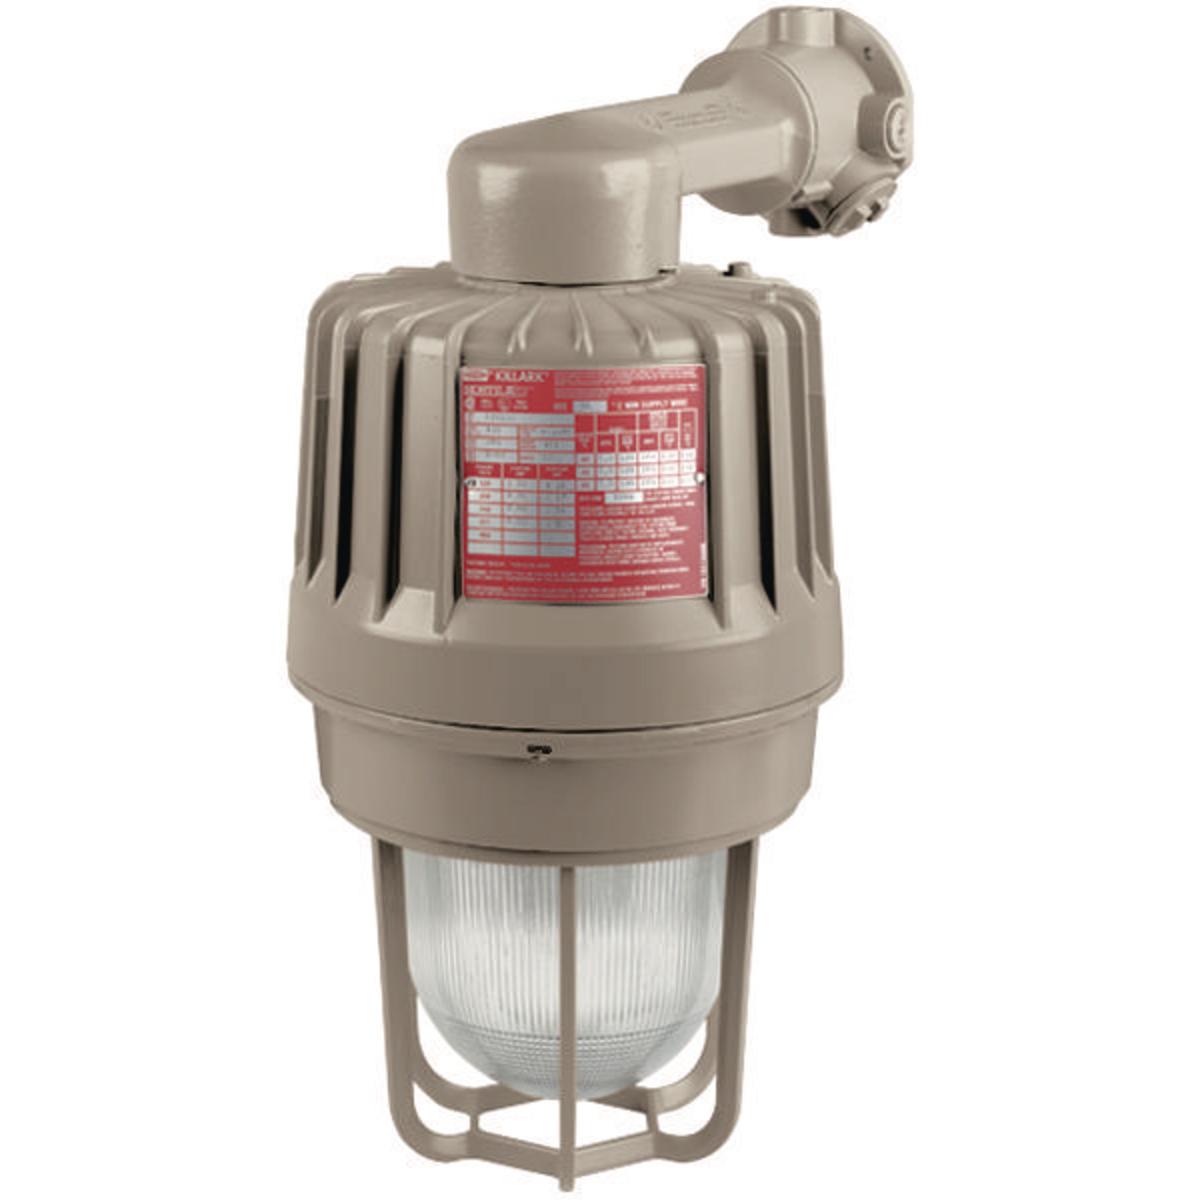 Hubbell EZS100B2GSU103DAT 100W Quadri-Volt High Pressure Sodium 3/4" Wall Mount Dual Arc -Assembled with Lamp  ; Three light sources – High Pressure Sodium (50-400W), Metal Halide (70-400W) and Pulse Start Metal Halide (175-400W) ; Mounting choice –Pendant, ceiling, 25˚ stanchion 